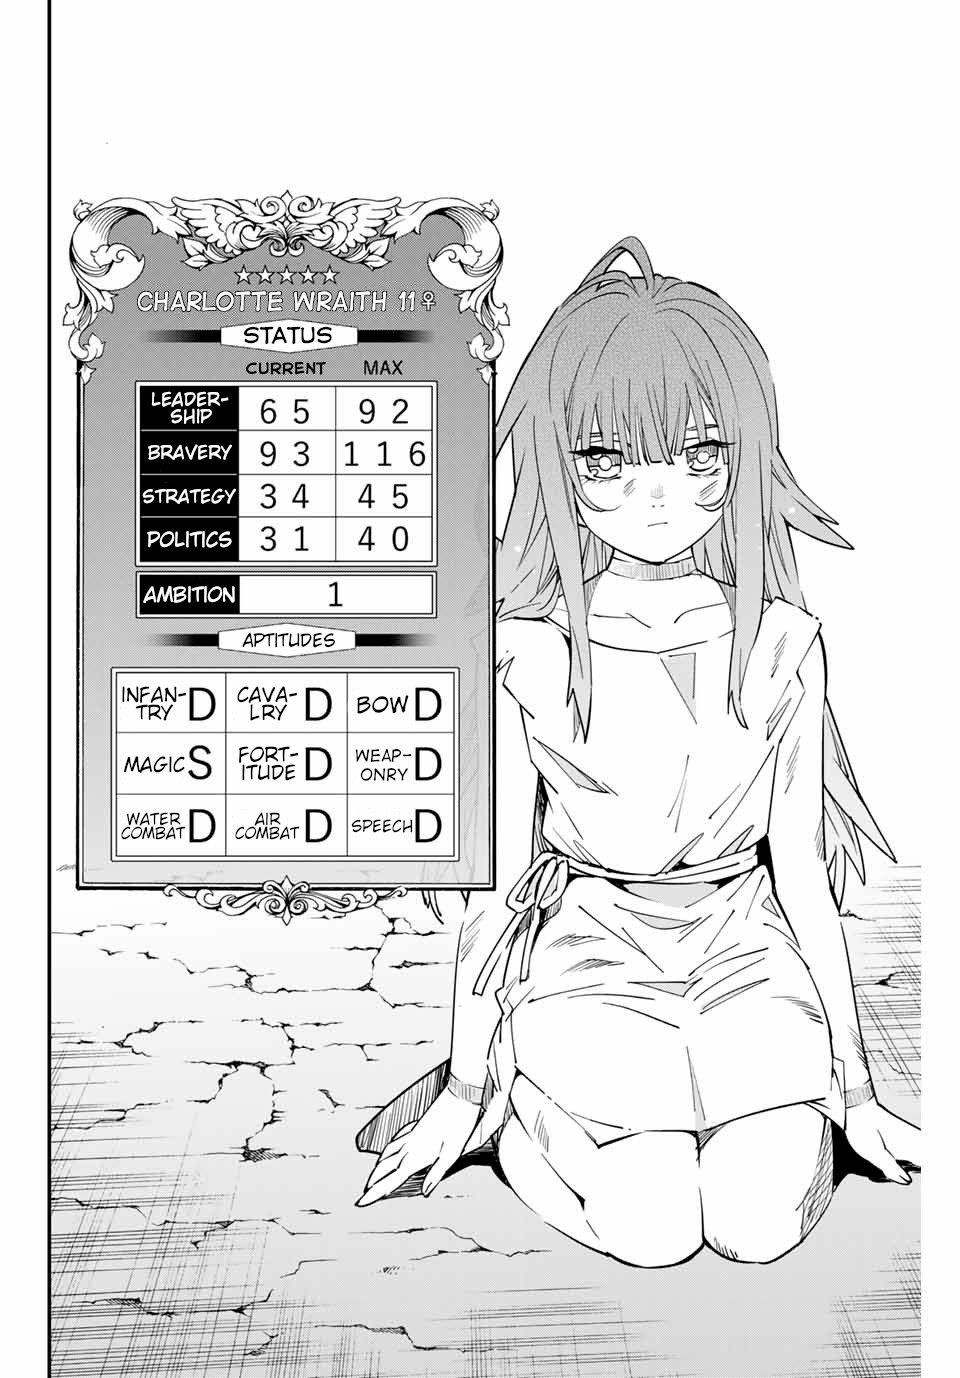 Reincarnated as an Aristocrat with an Appraisal Skill Vol. 1 Ch. 6 Charlotte Wraith